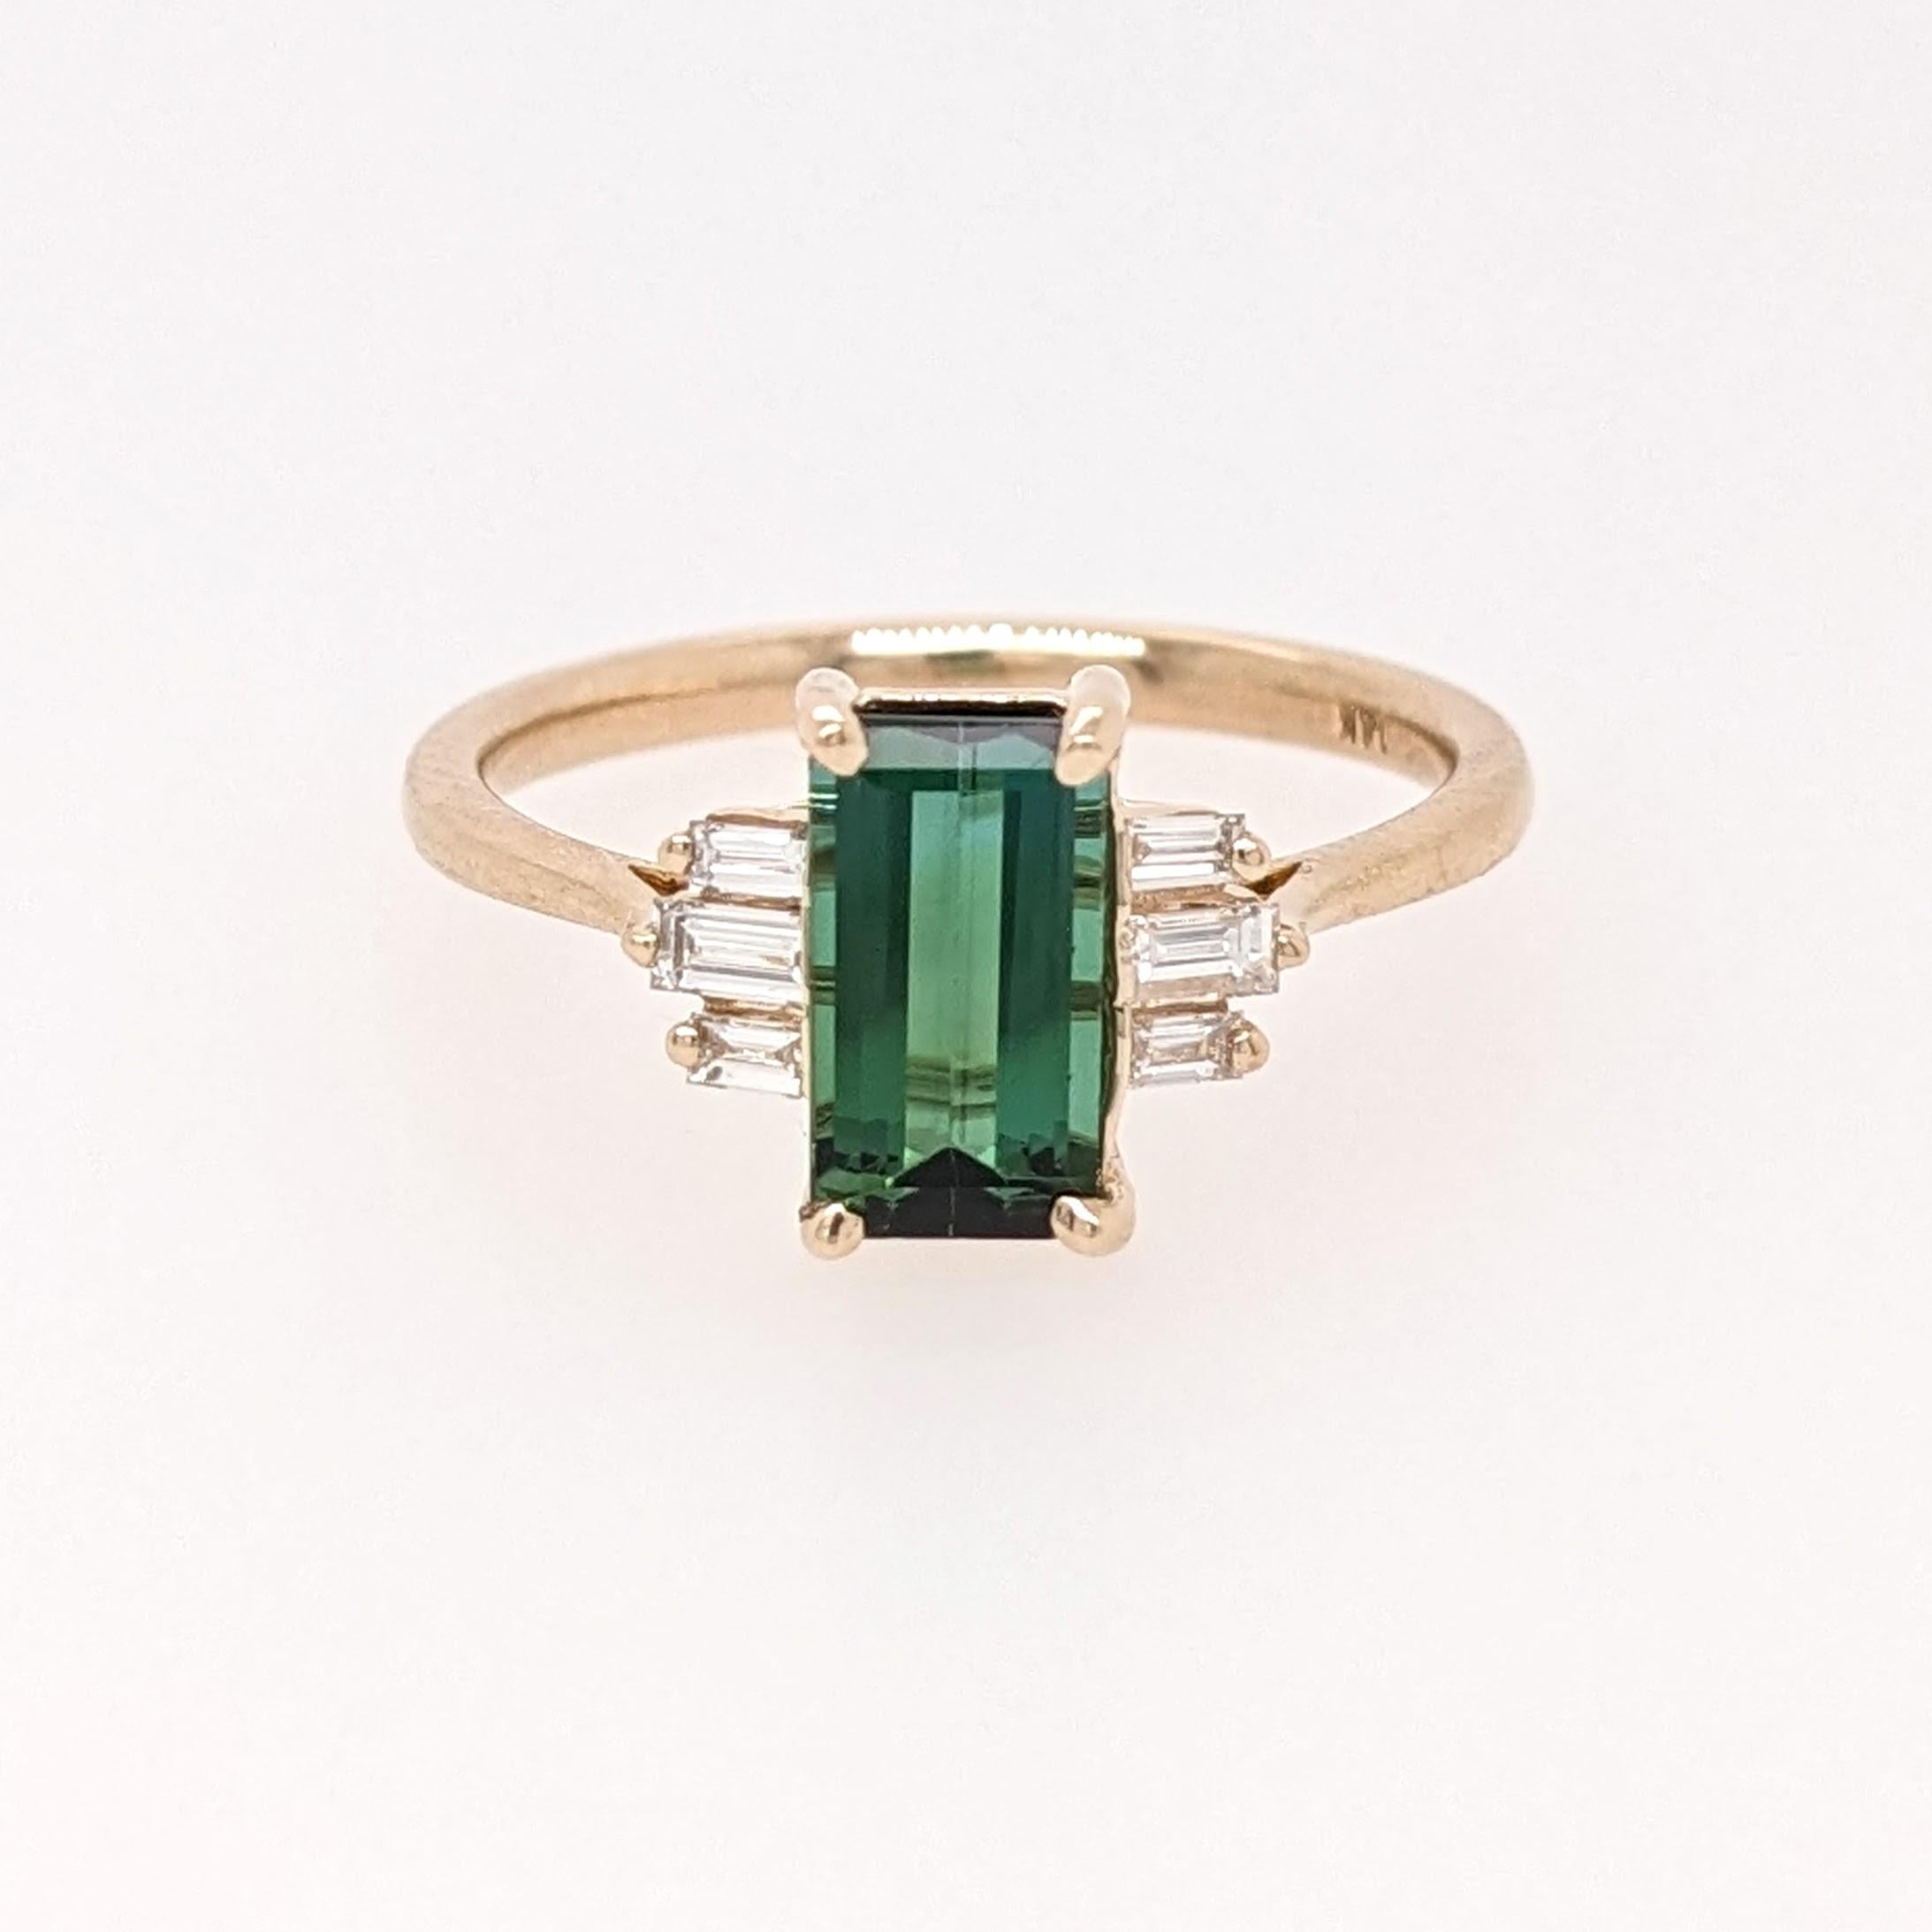 A vivid green Tourmaline looks exquisite in this elegant minimalist ring with cute diamond accents. A statement ring design perfect for an eye catching engagement or anniversary. This ring also makes a beautiful October birthstone ring for your